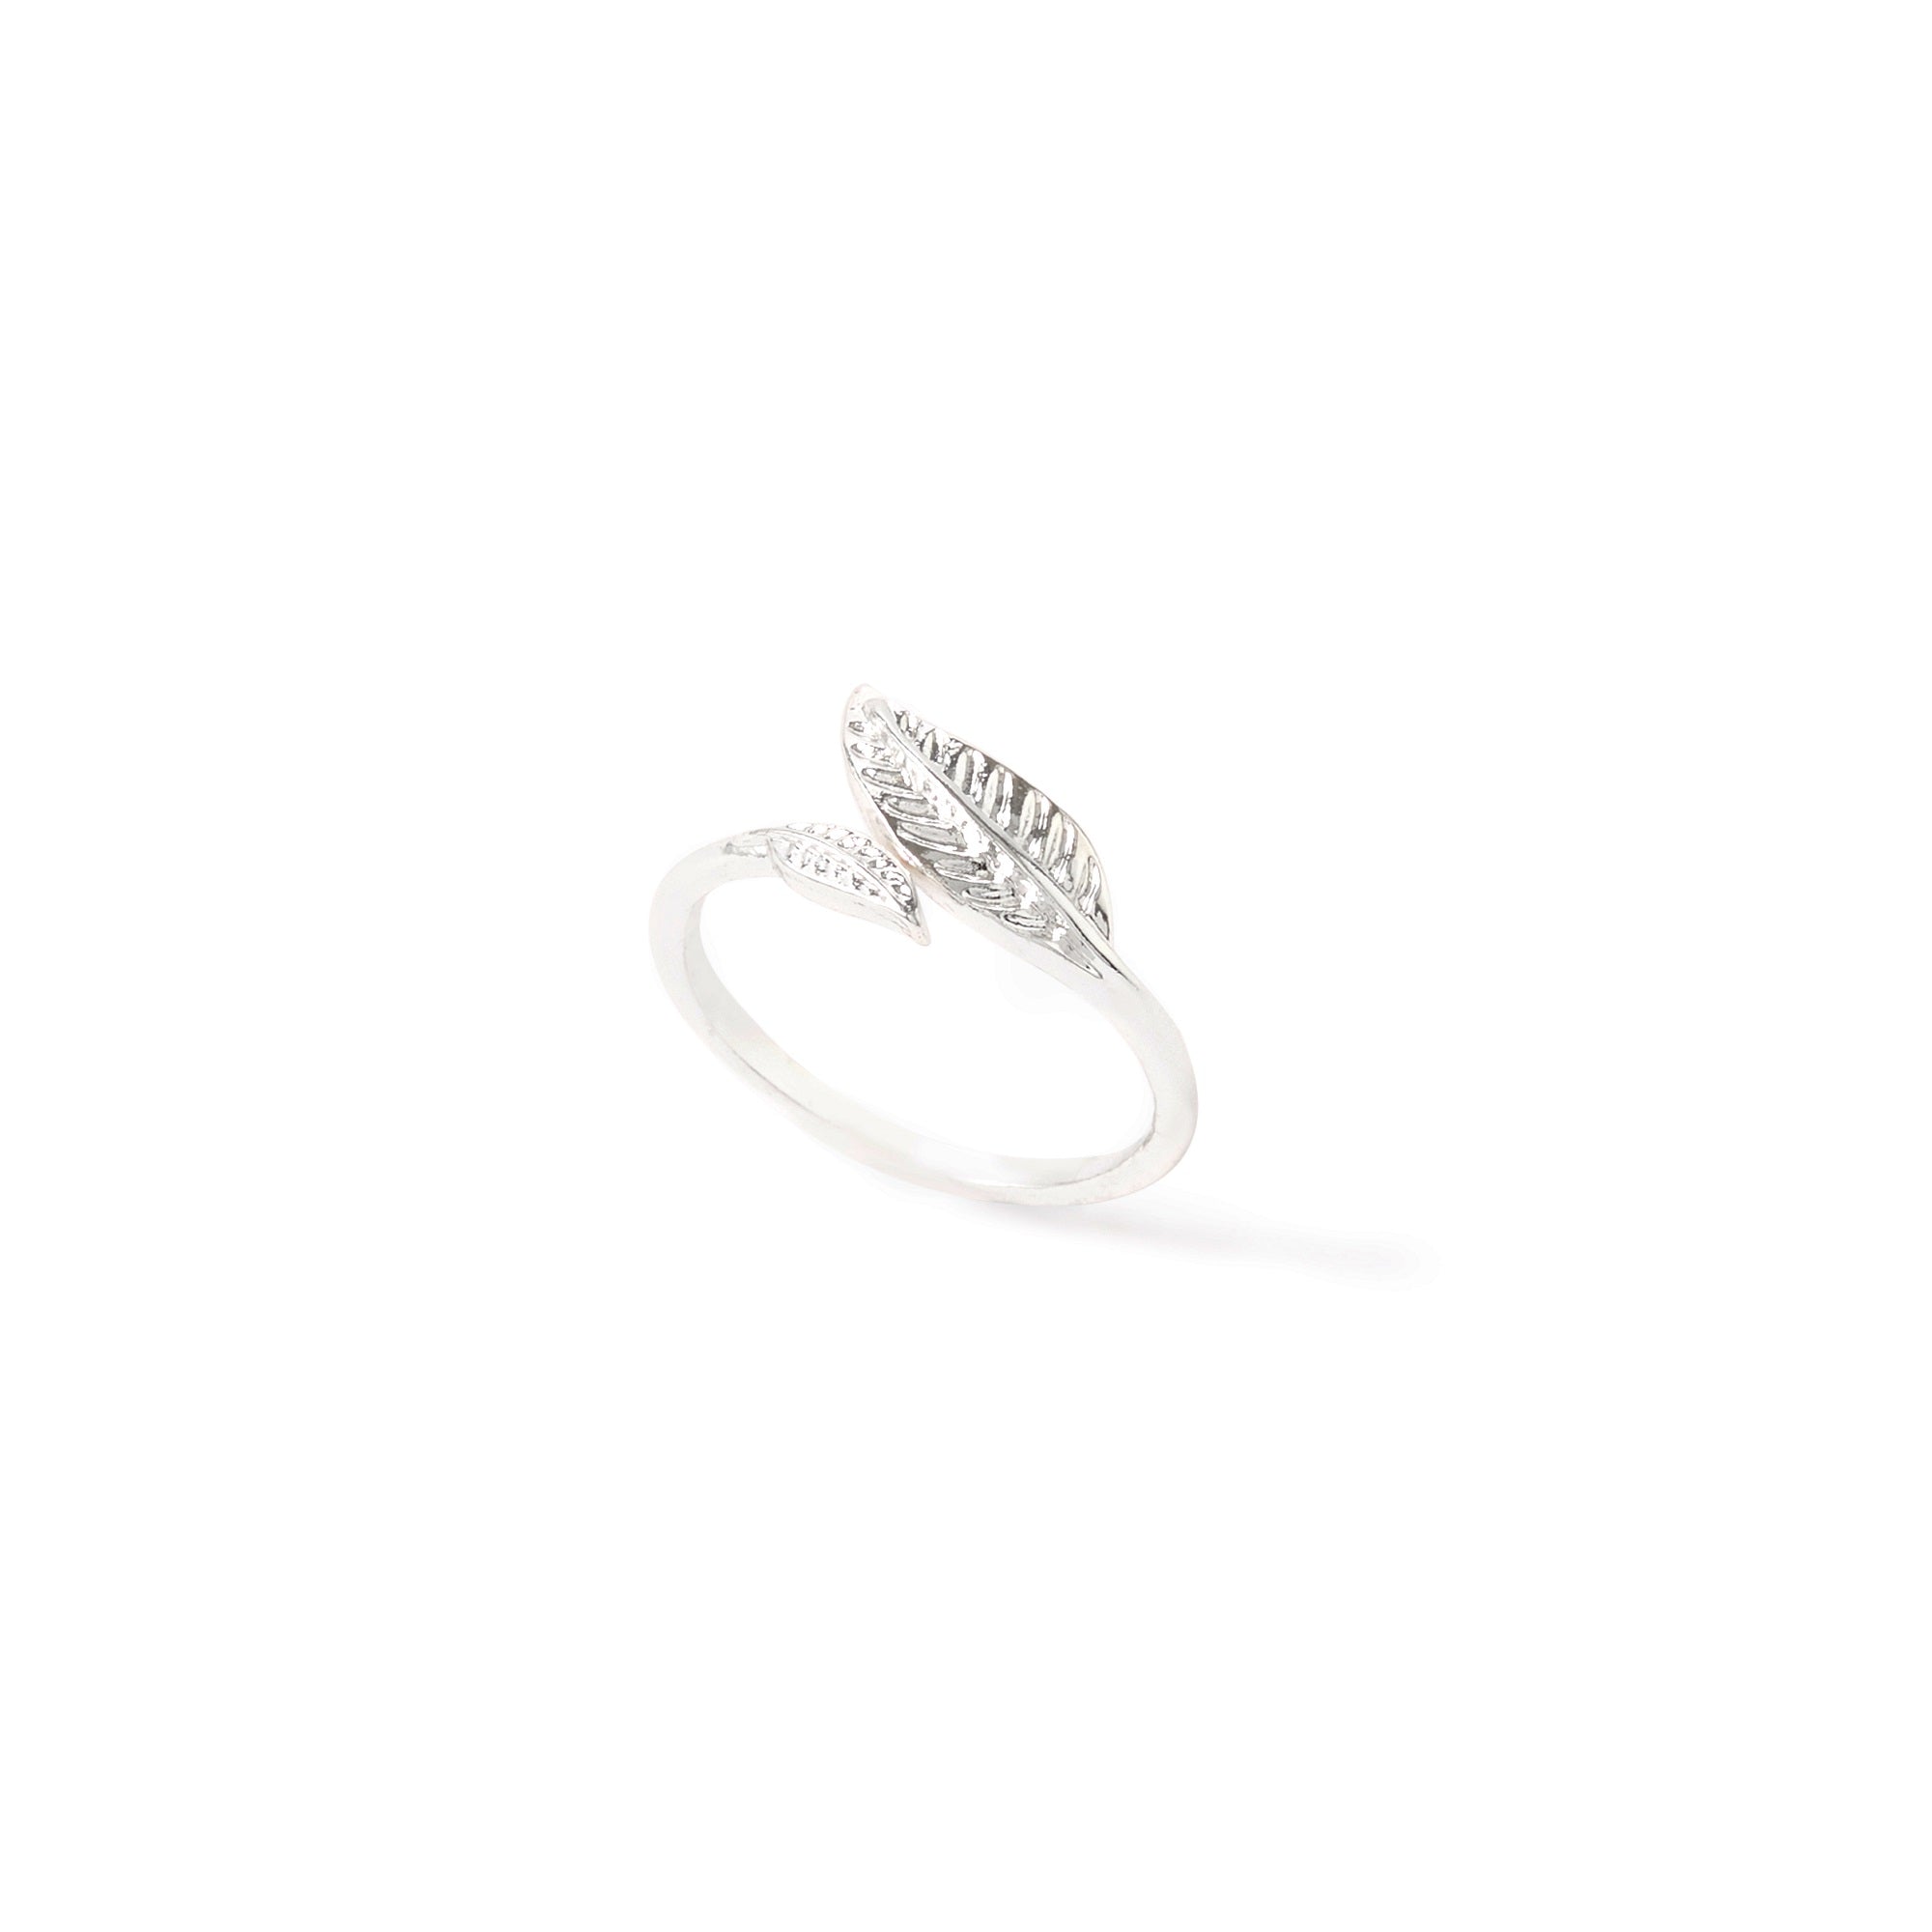 Accessorize London Women's Silver set of 2 Leaf Wrap Ring-Small